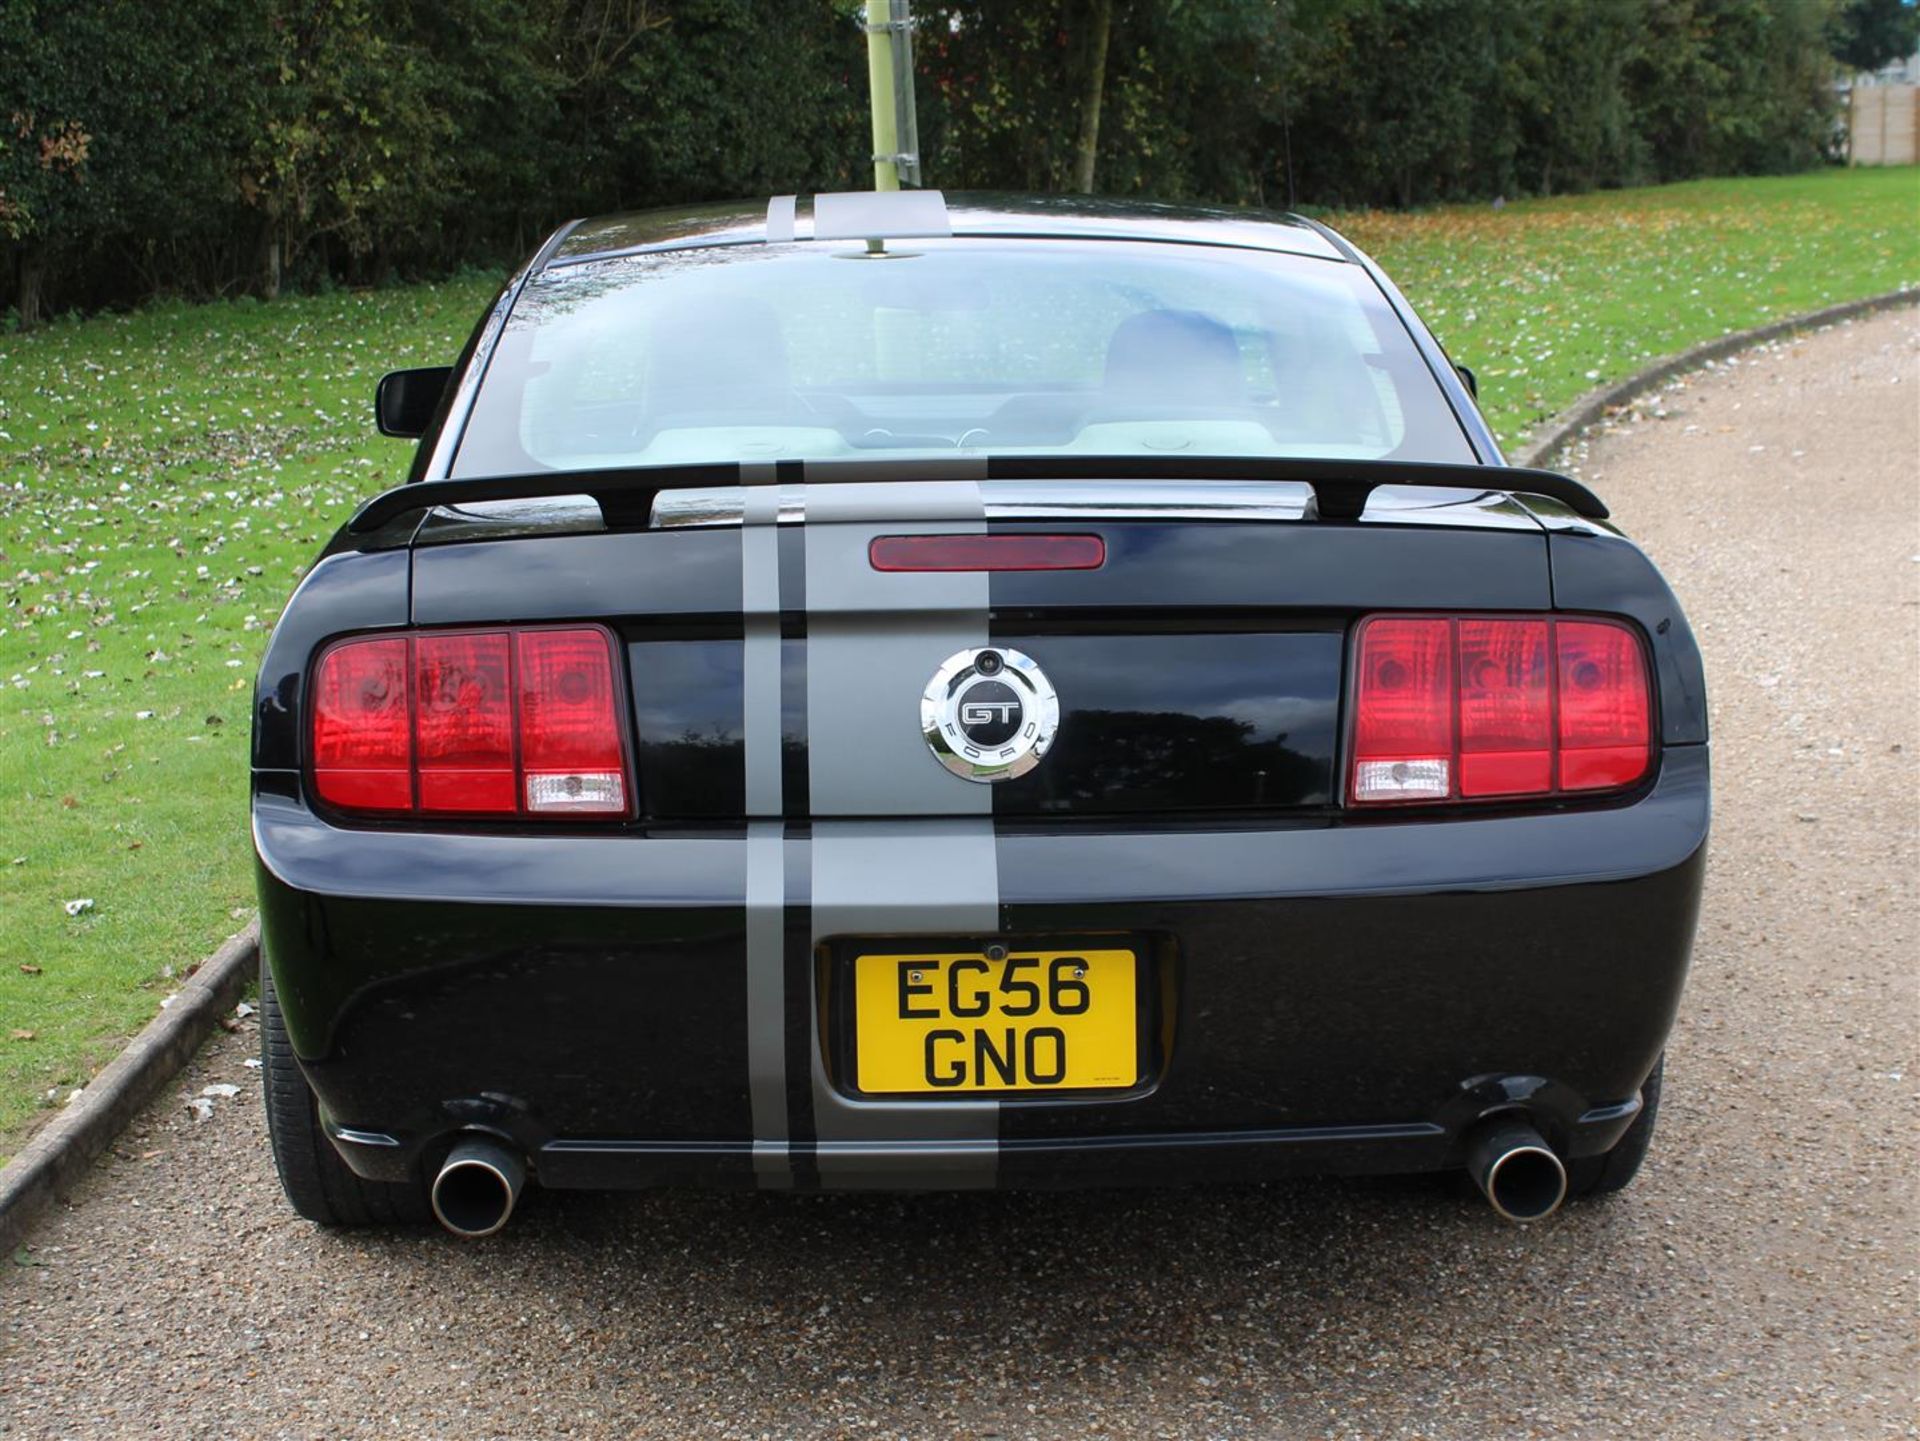 2007 Ford Mustang 4.6 V8 GT LHD - Image 6 of 23